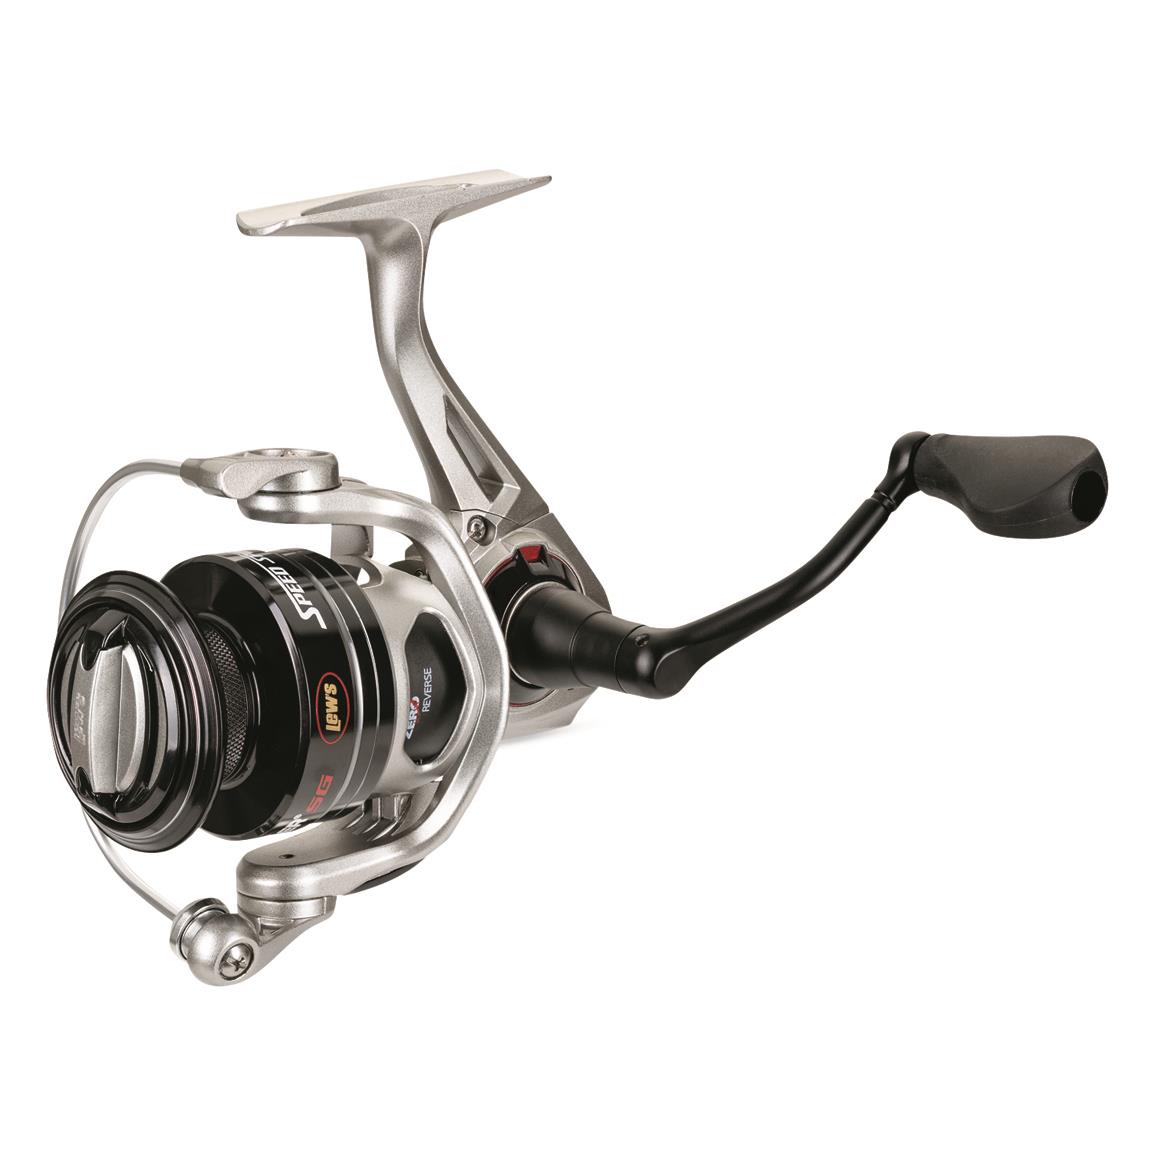 Mr. Crappie Crappie Thunder Pre-Spooled Spinning Reels - 732865